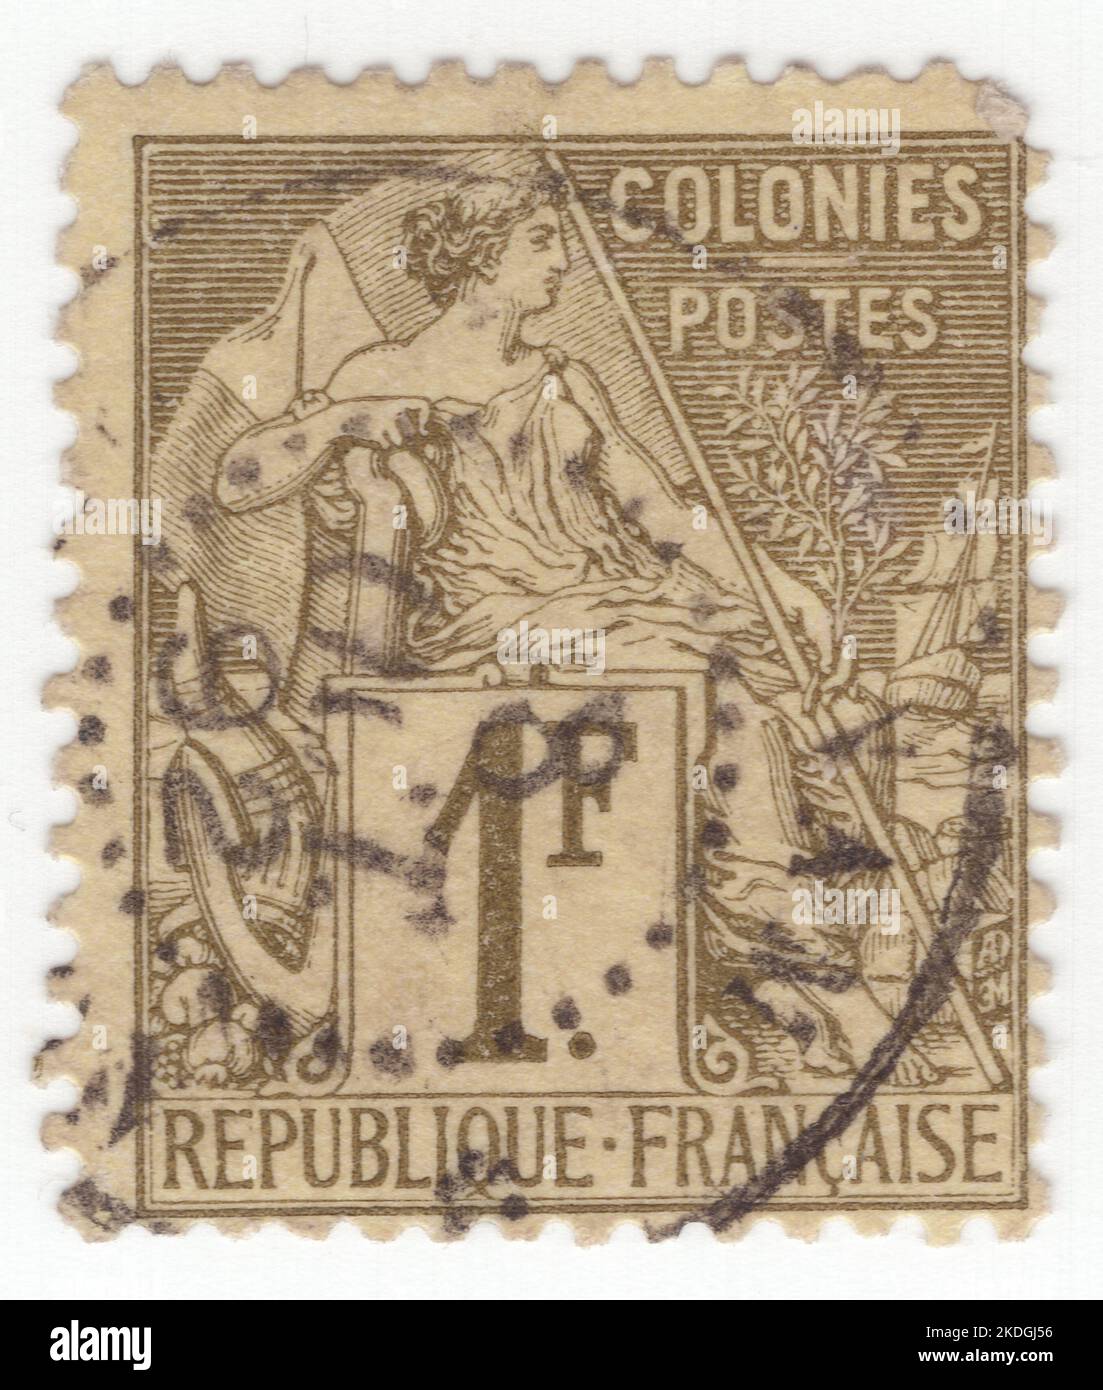 FRENCH COLONIES - 1881: An 1 franc bronze-green on straw postage stamp depicting allegory female figure 'Commerce' sitting alone and inscribed 'COLONIES'. Series French Colonies by Alphee Dubois Stock Photo